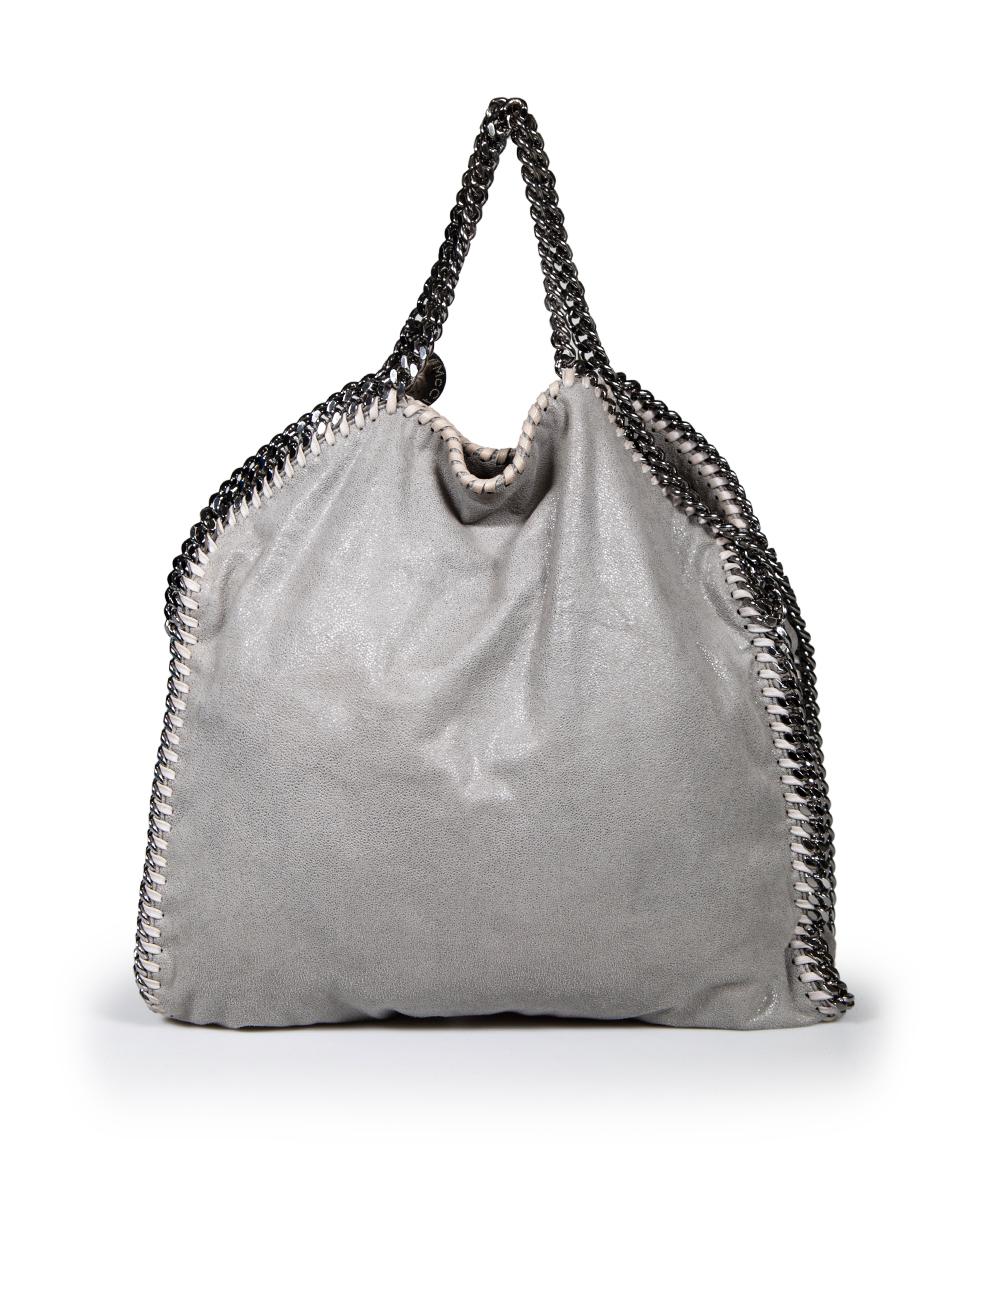 Stella McCartney Grey Faux Suede Medium Falabella Tote In Good Condition For Sale In London, GB